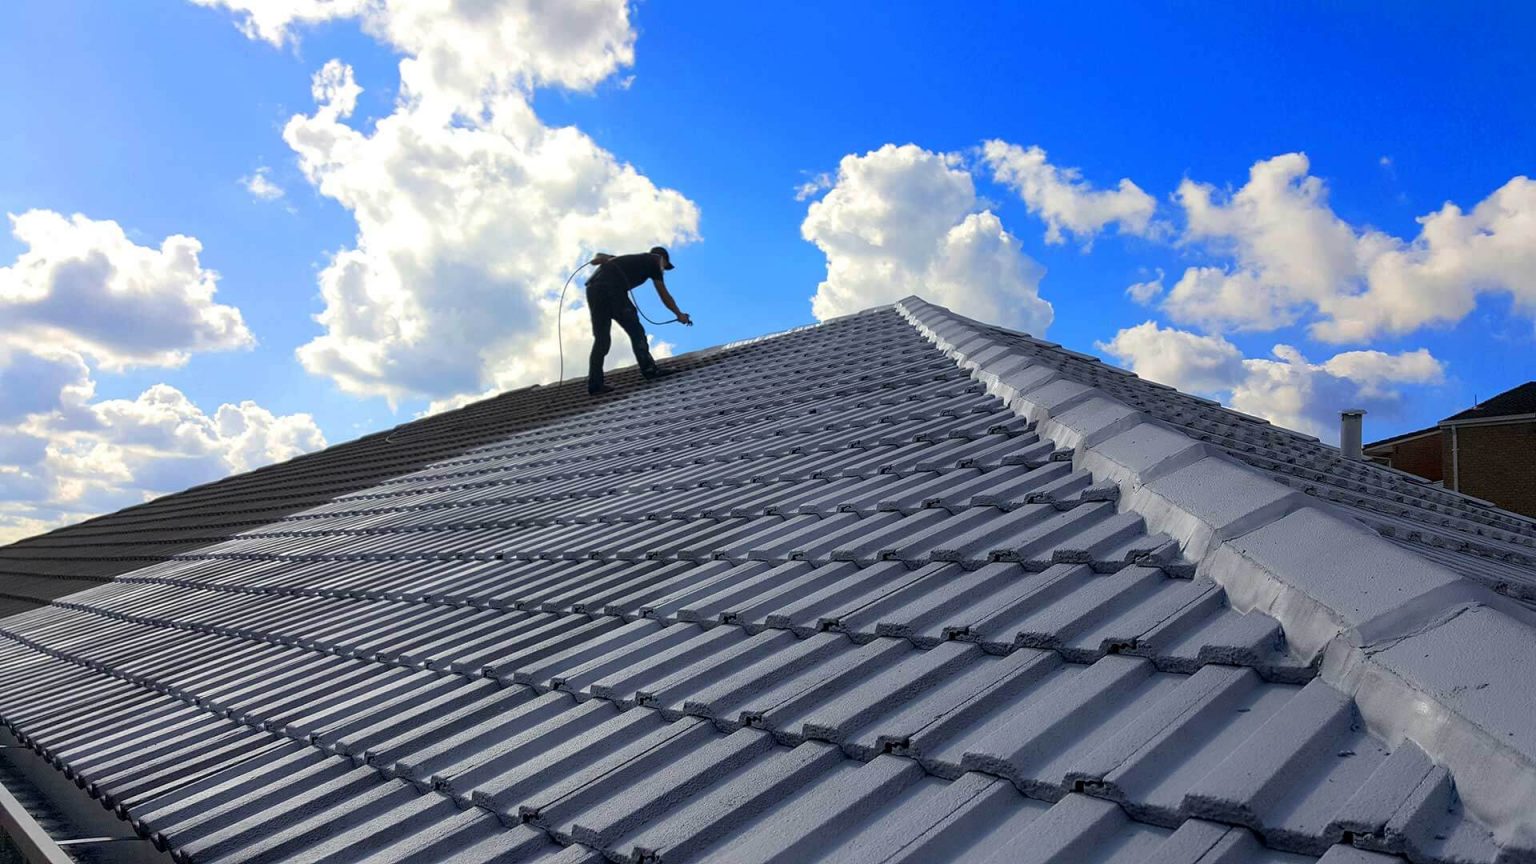 7 Signs You Need a Roof Restoration or Repair Complete Business News